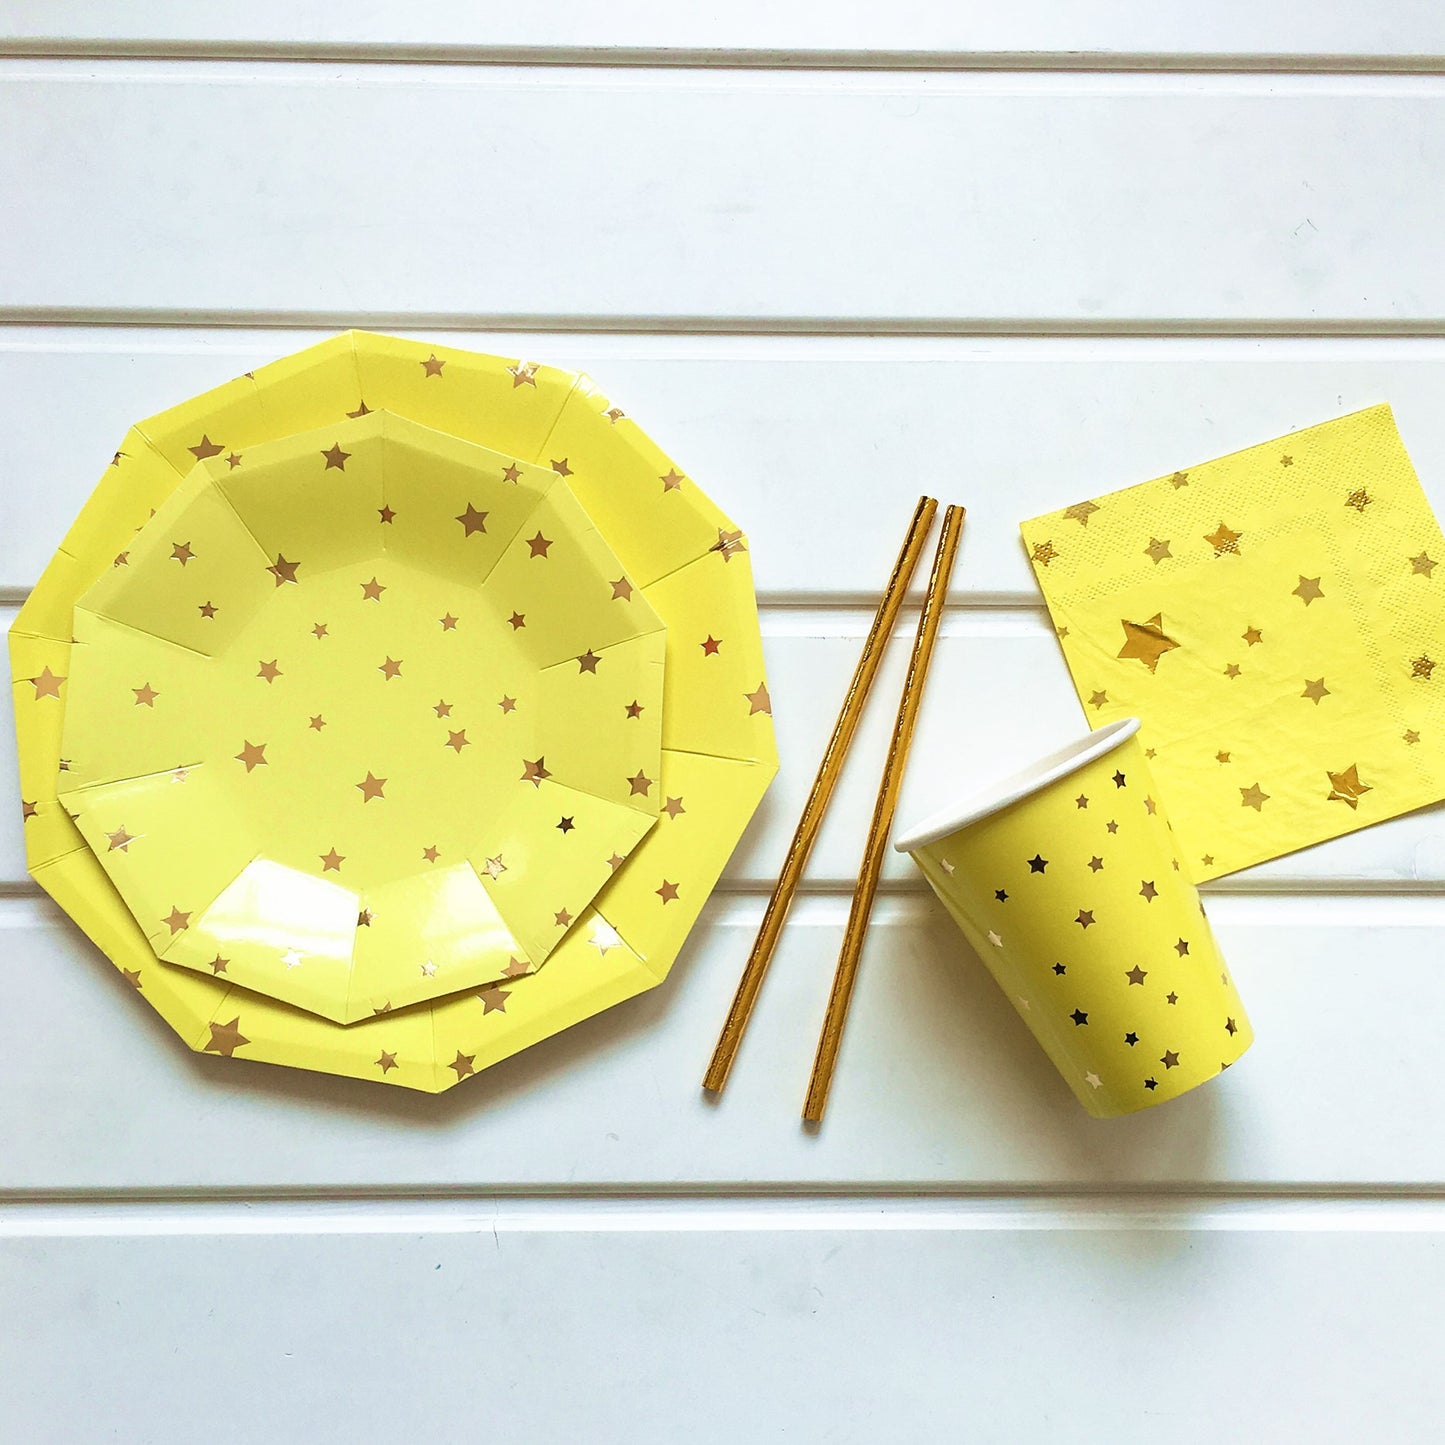 40PCs Gliding Star Yellow Disposable Tableware Party Plates And Cups And Napkins Sets